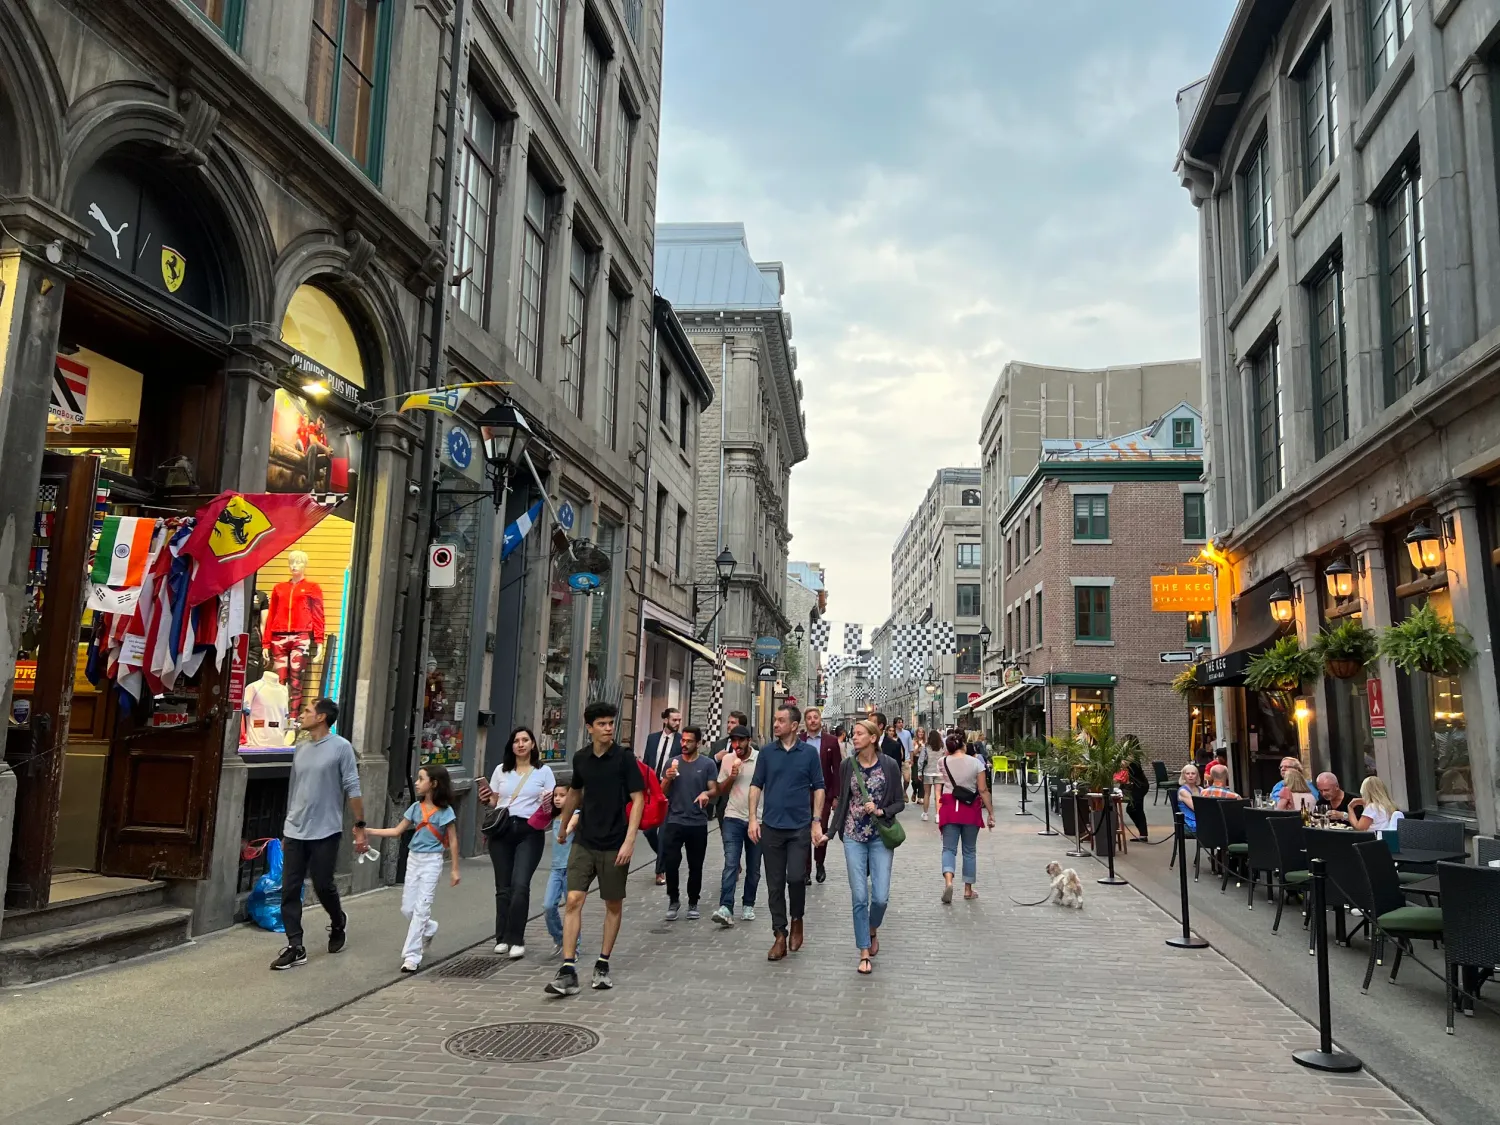 A street in Old Montréal